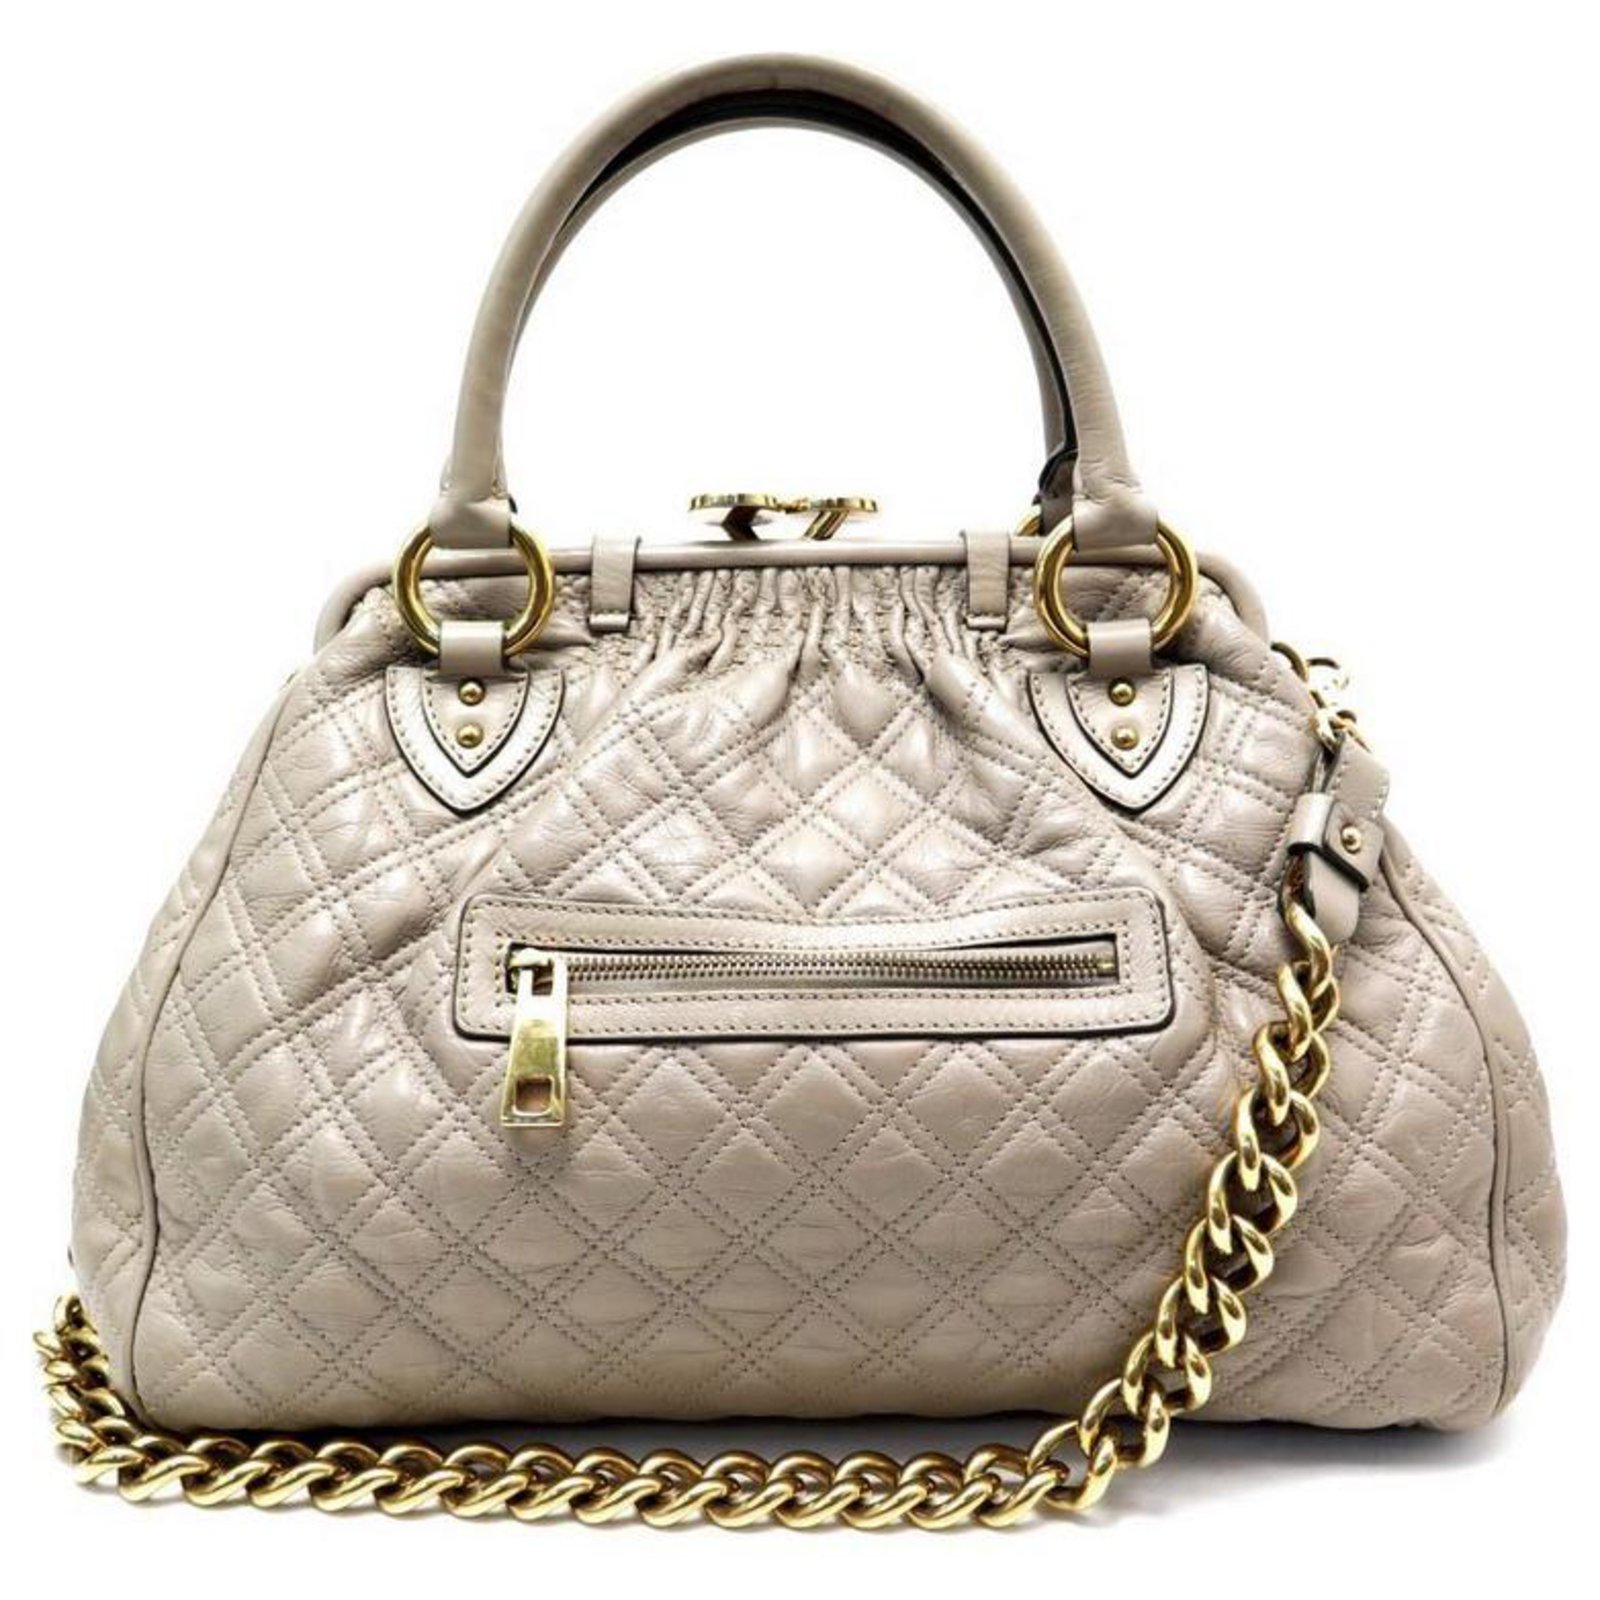 Marc Jacobs - Authenticated The Box Bag Handbag - Leather Beige Plain for Women, Very Good Condition